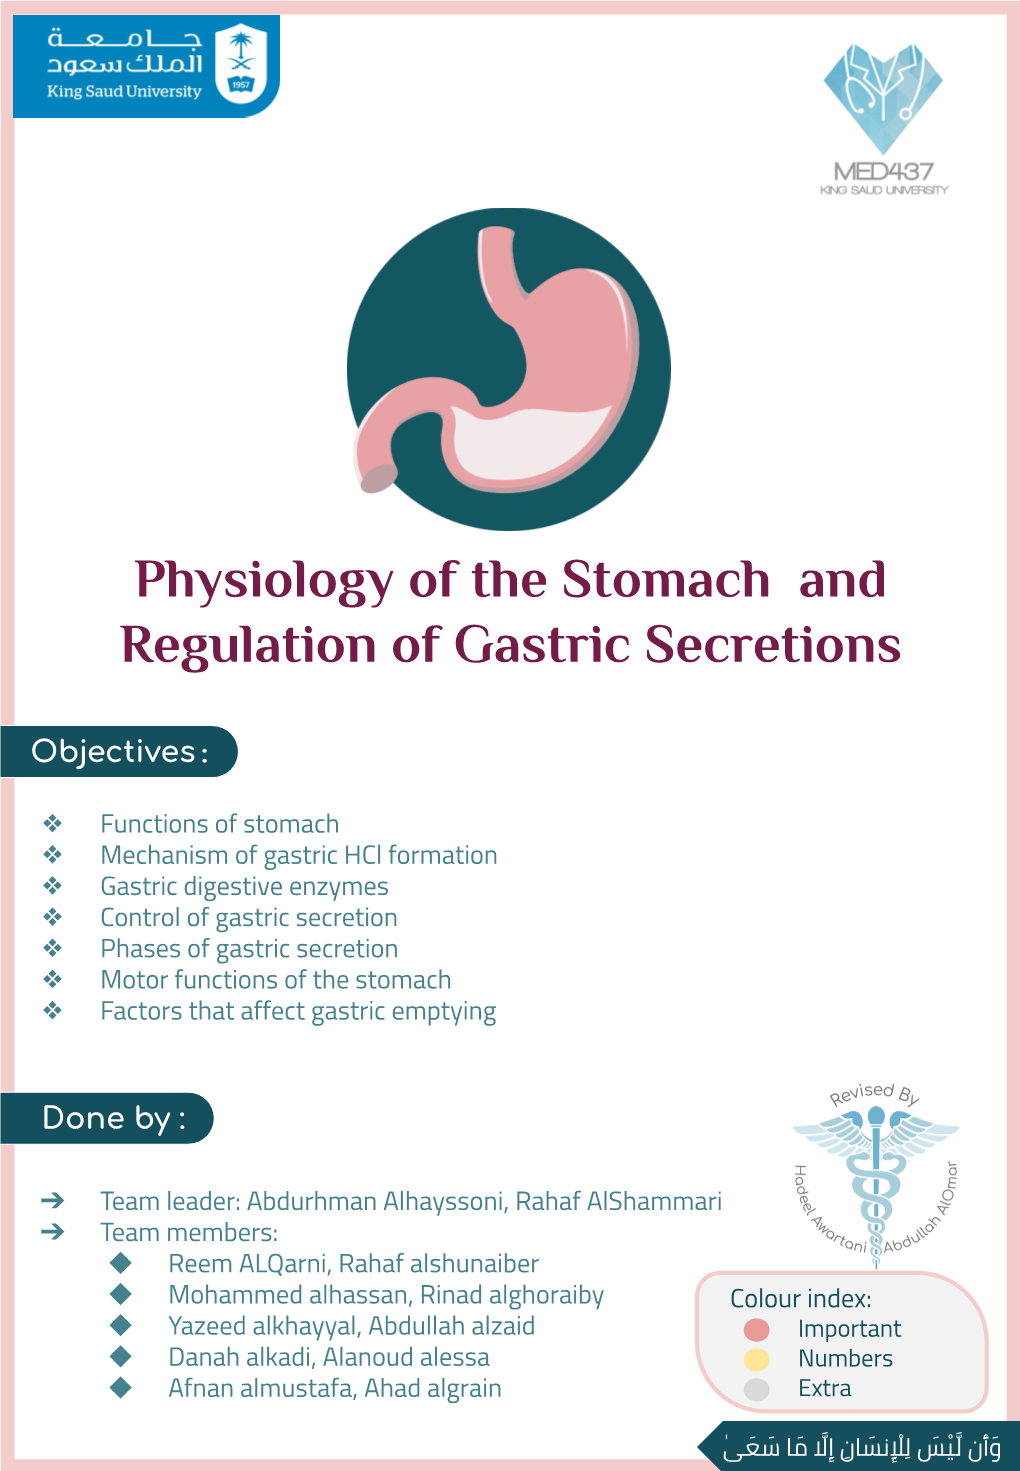 Physiology of the Stomach and Regulation of Gastric Secretions